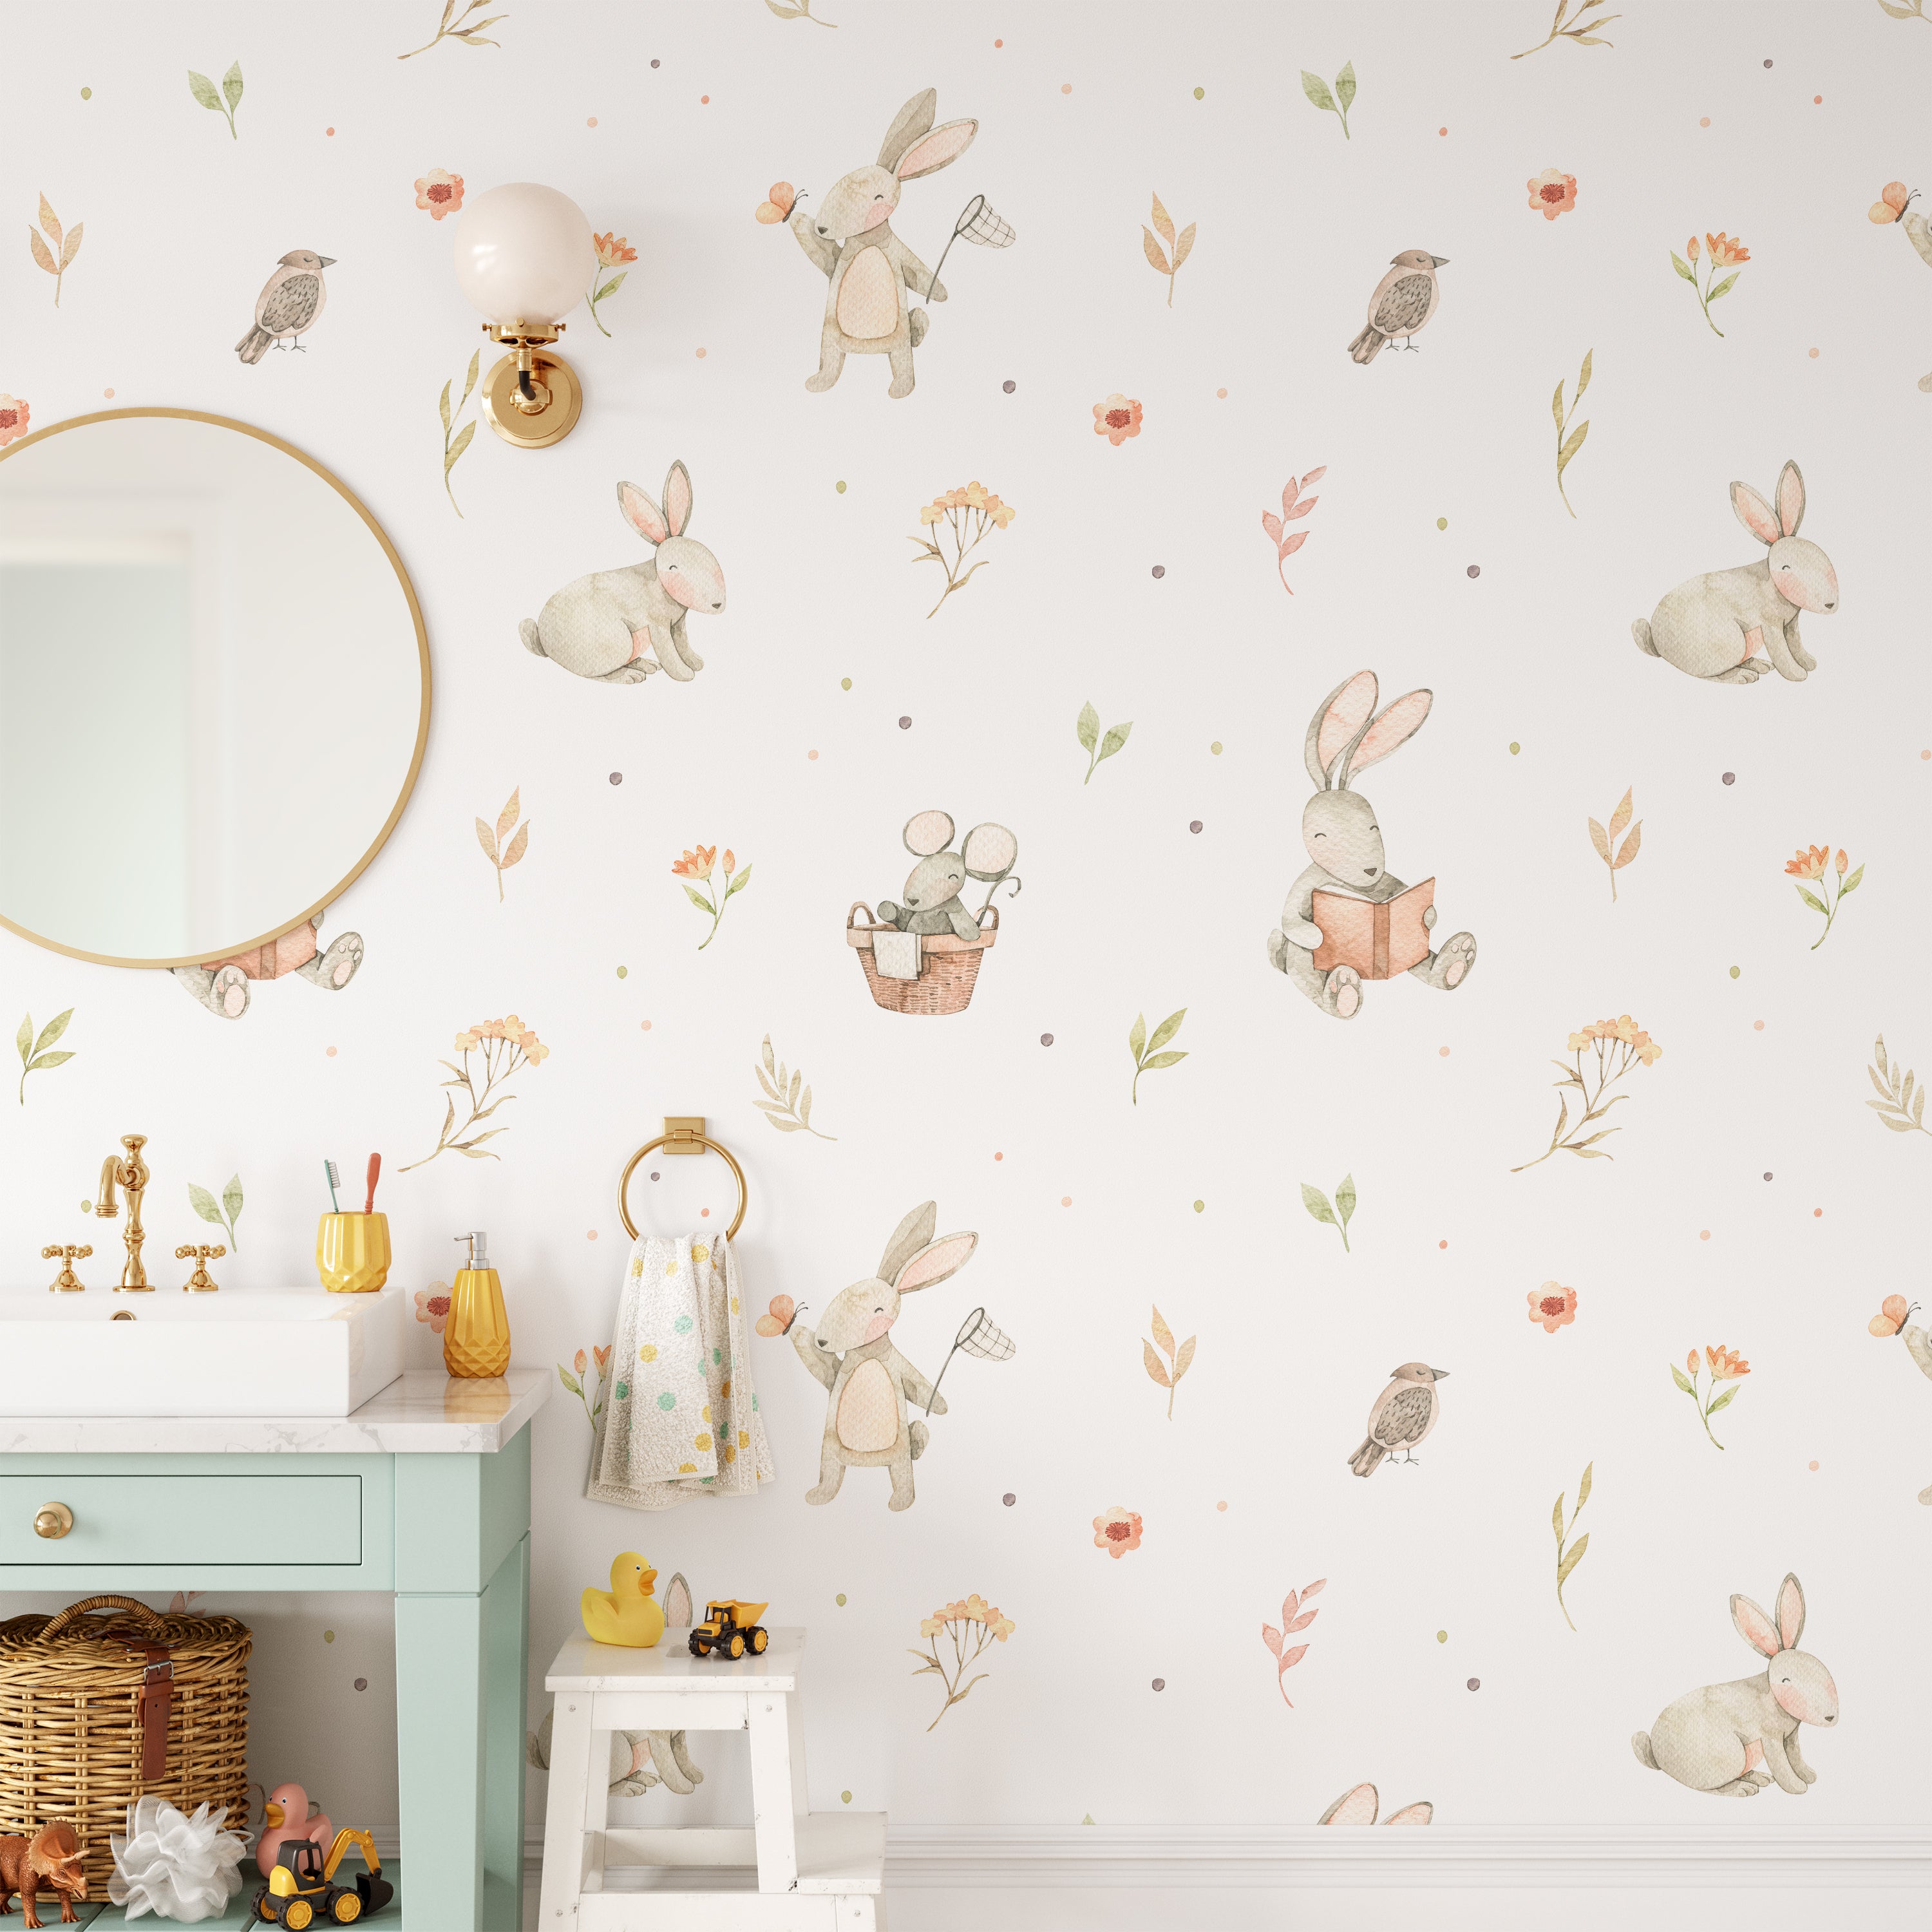 A nursery room decorated with the Watercolour Bunnies Wallpaper on the wall, creating a delightful scene with rabbits engaging in quiet play and exploration amongst flora and fauna. The space is complemented by a round mirror, a mint-colored dresser, and whimsical children's decor.